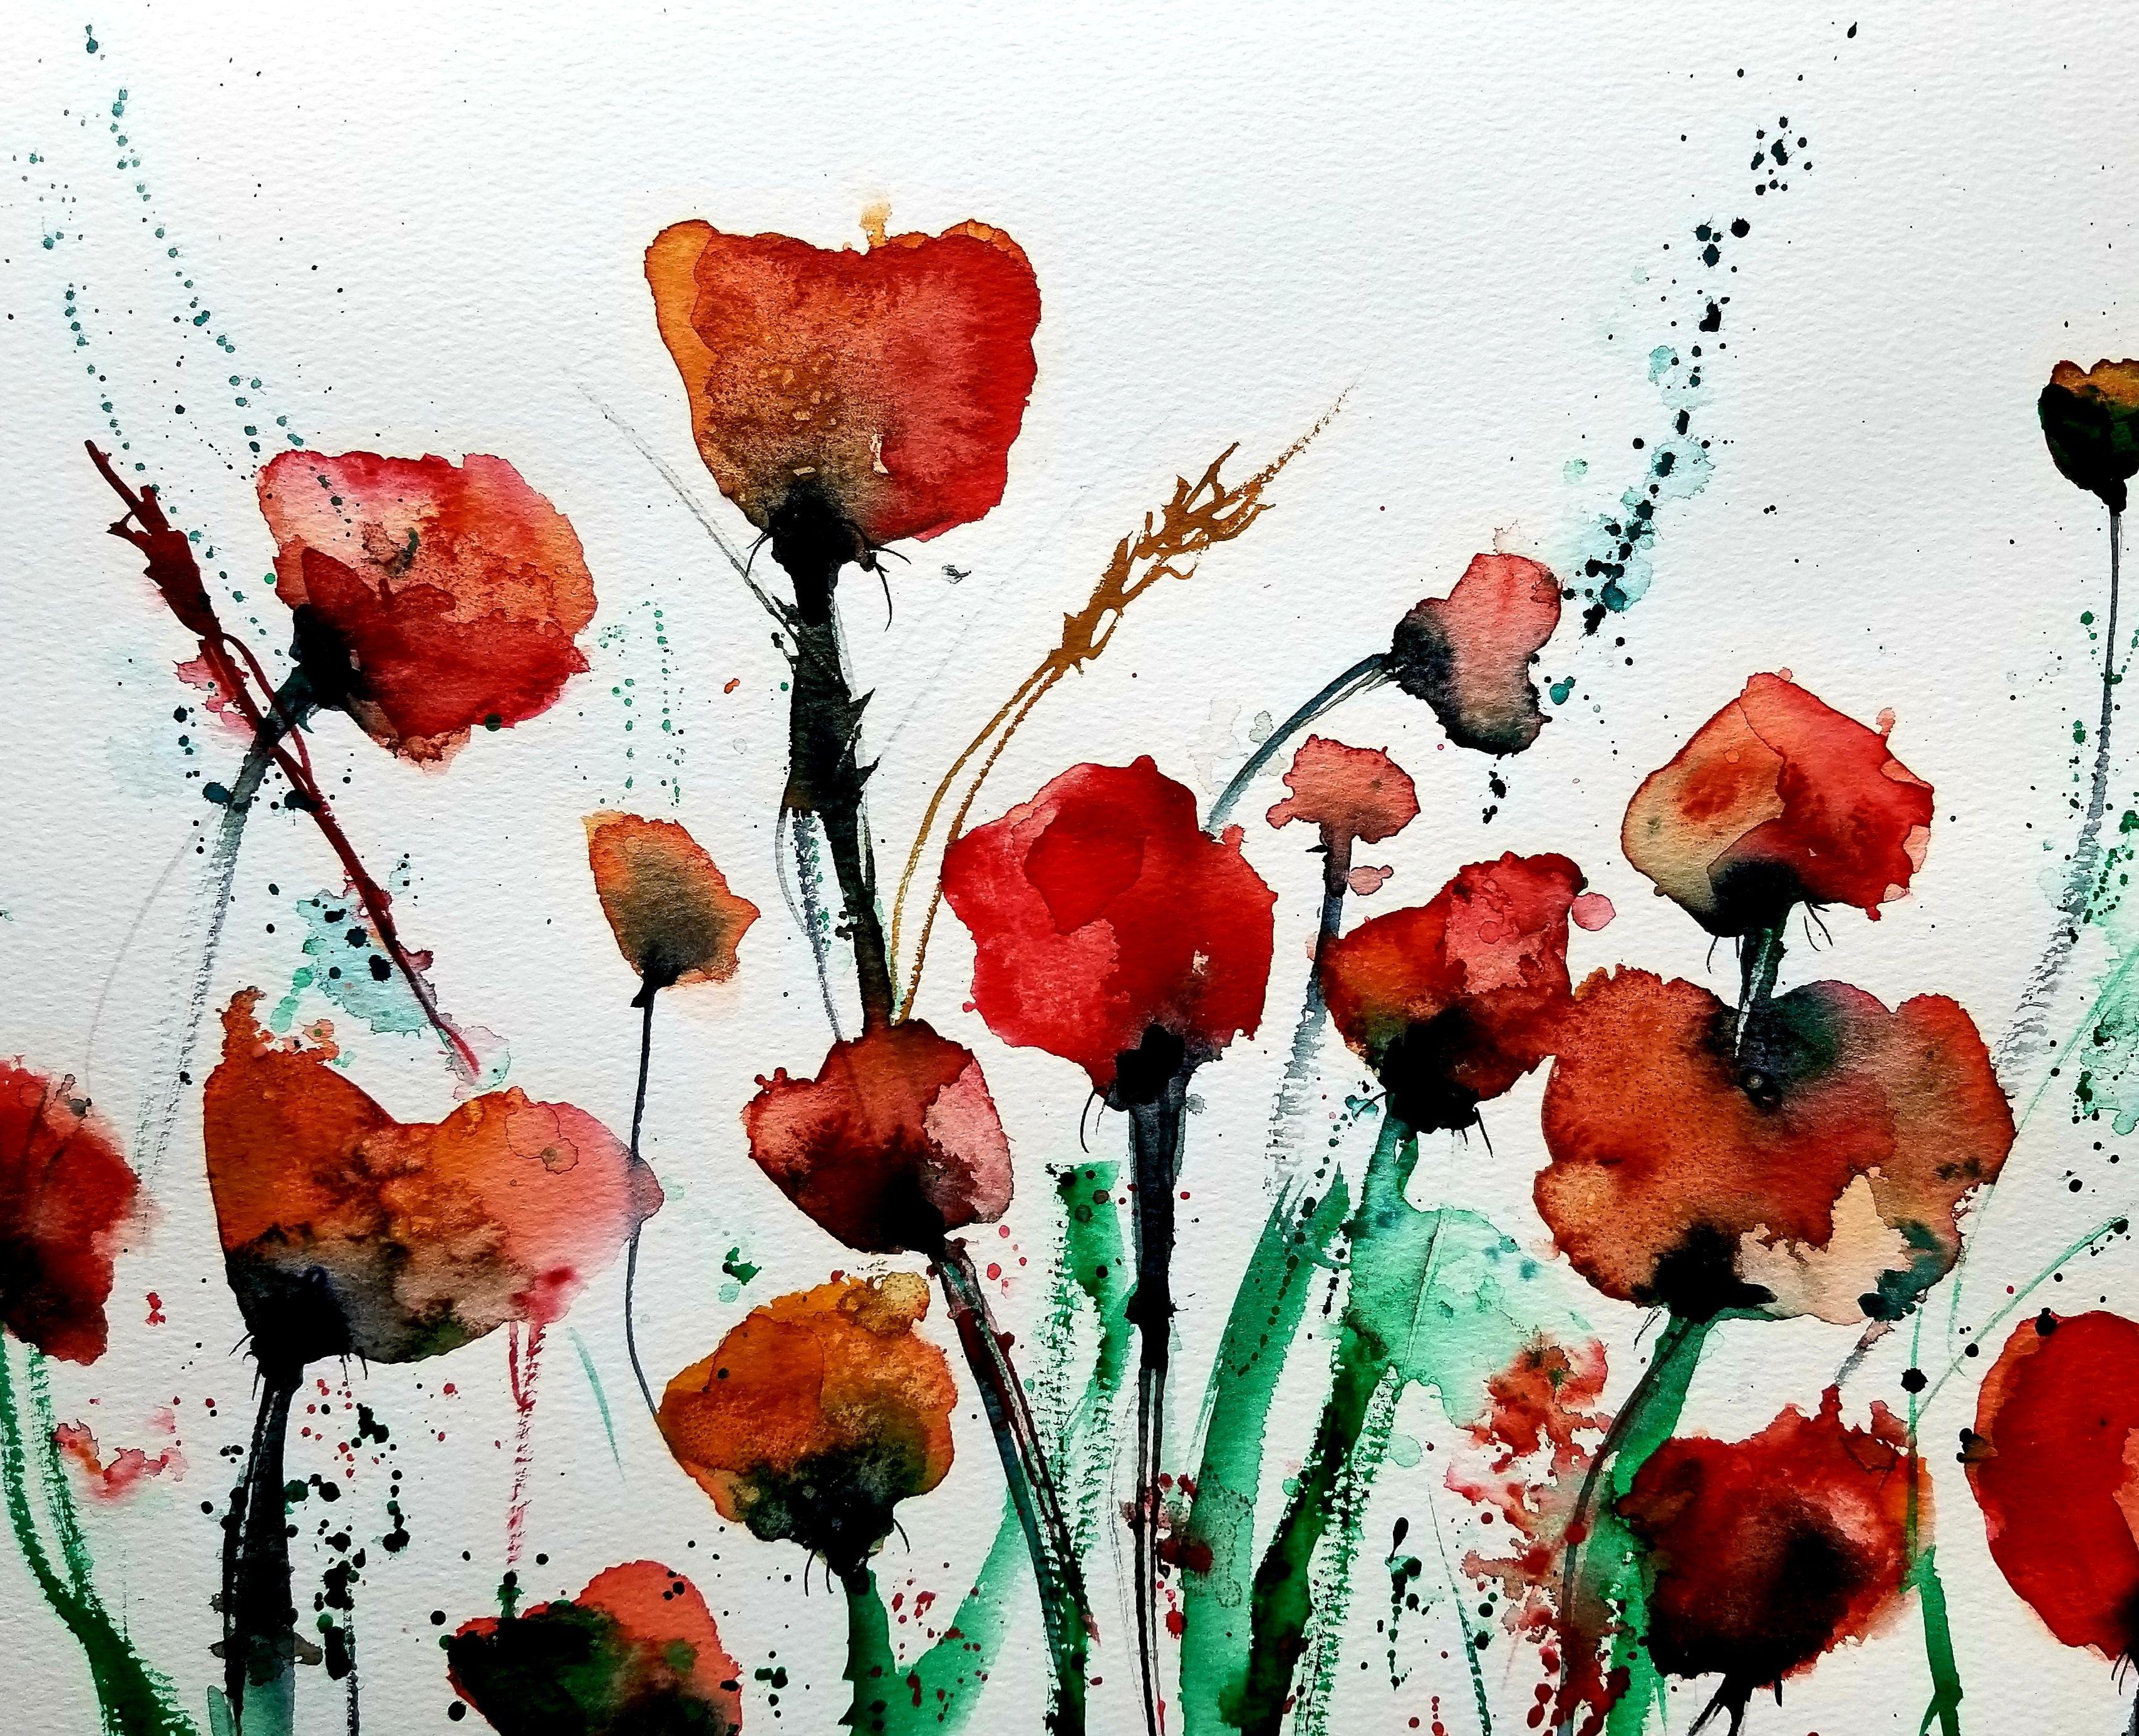 Jim Lagasse Abstract Drawing - Poppy Field, Painting, Watercolor on Watercolor Paper